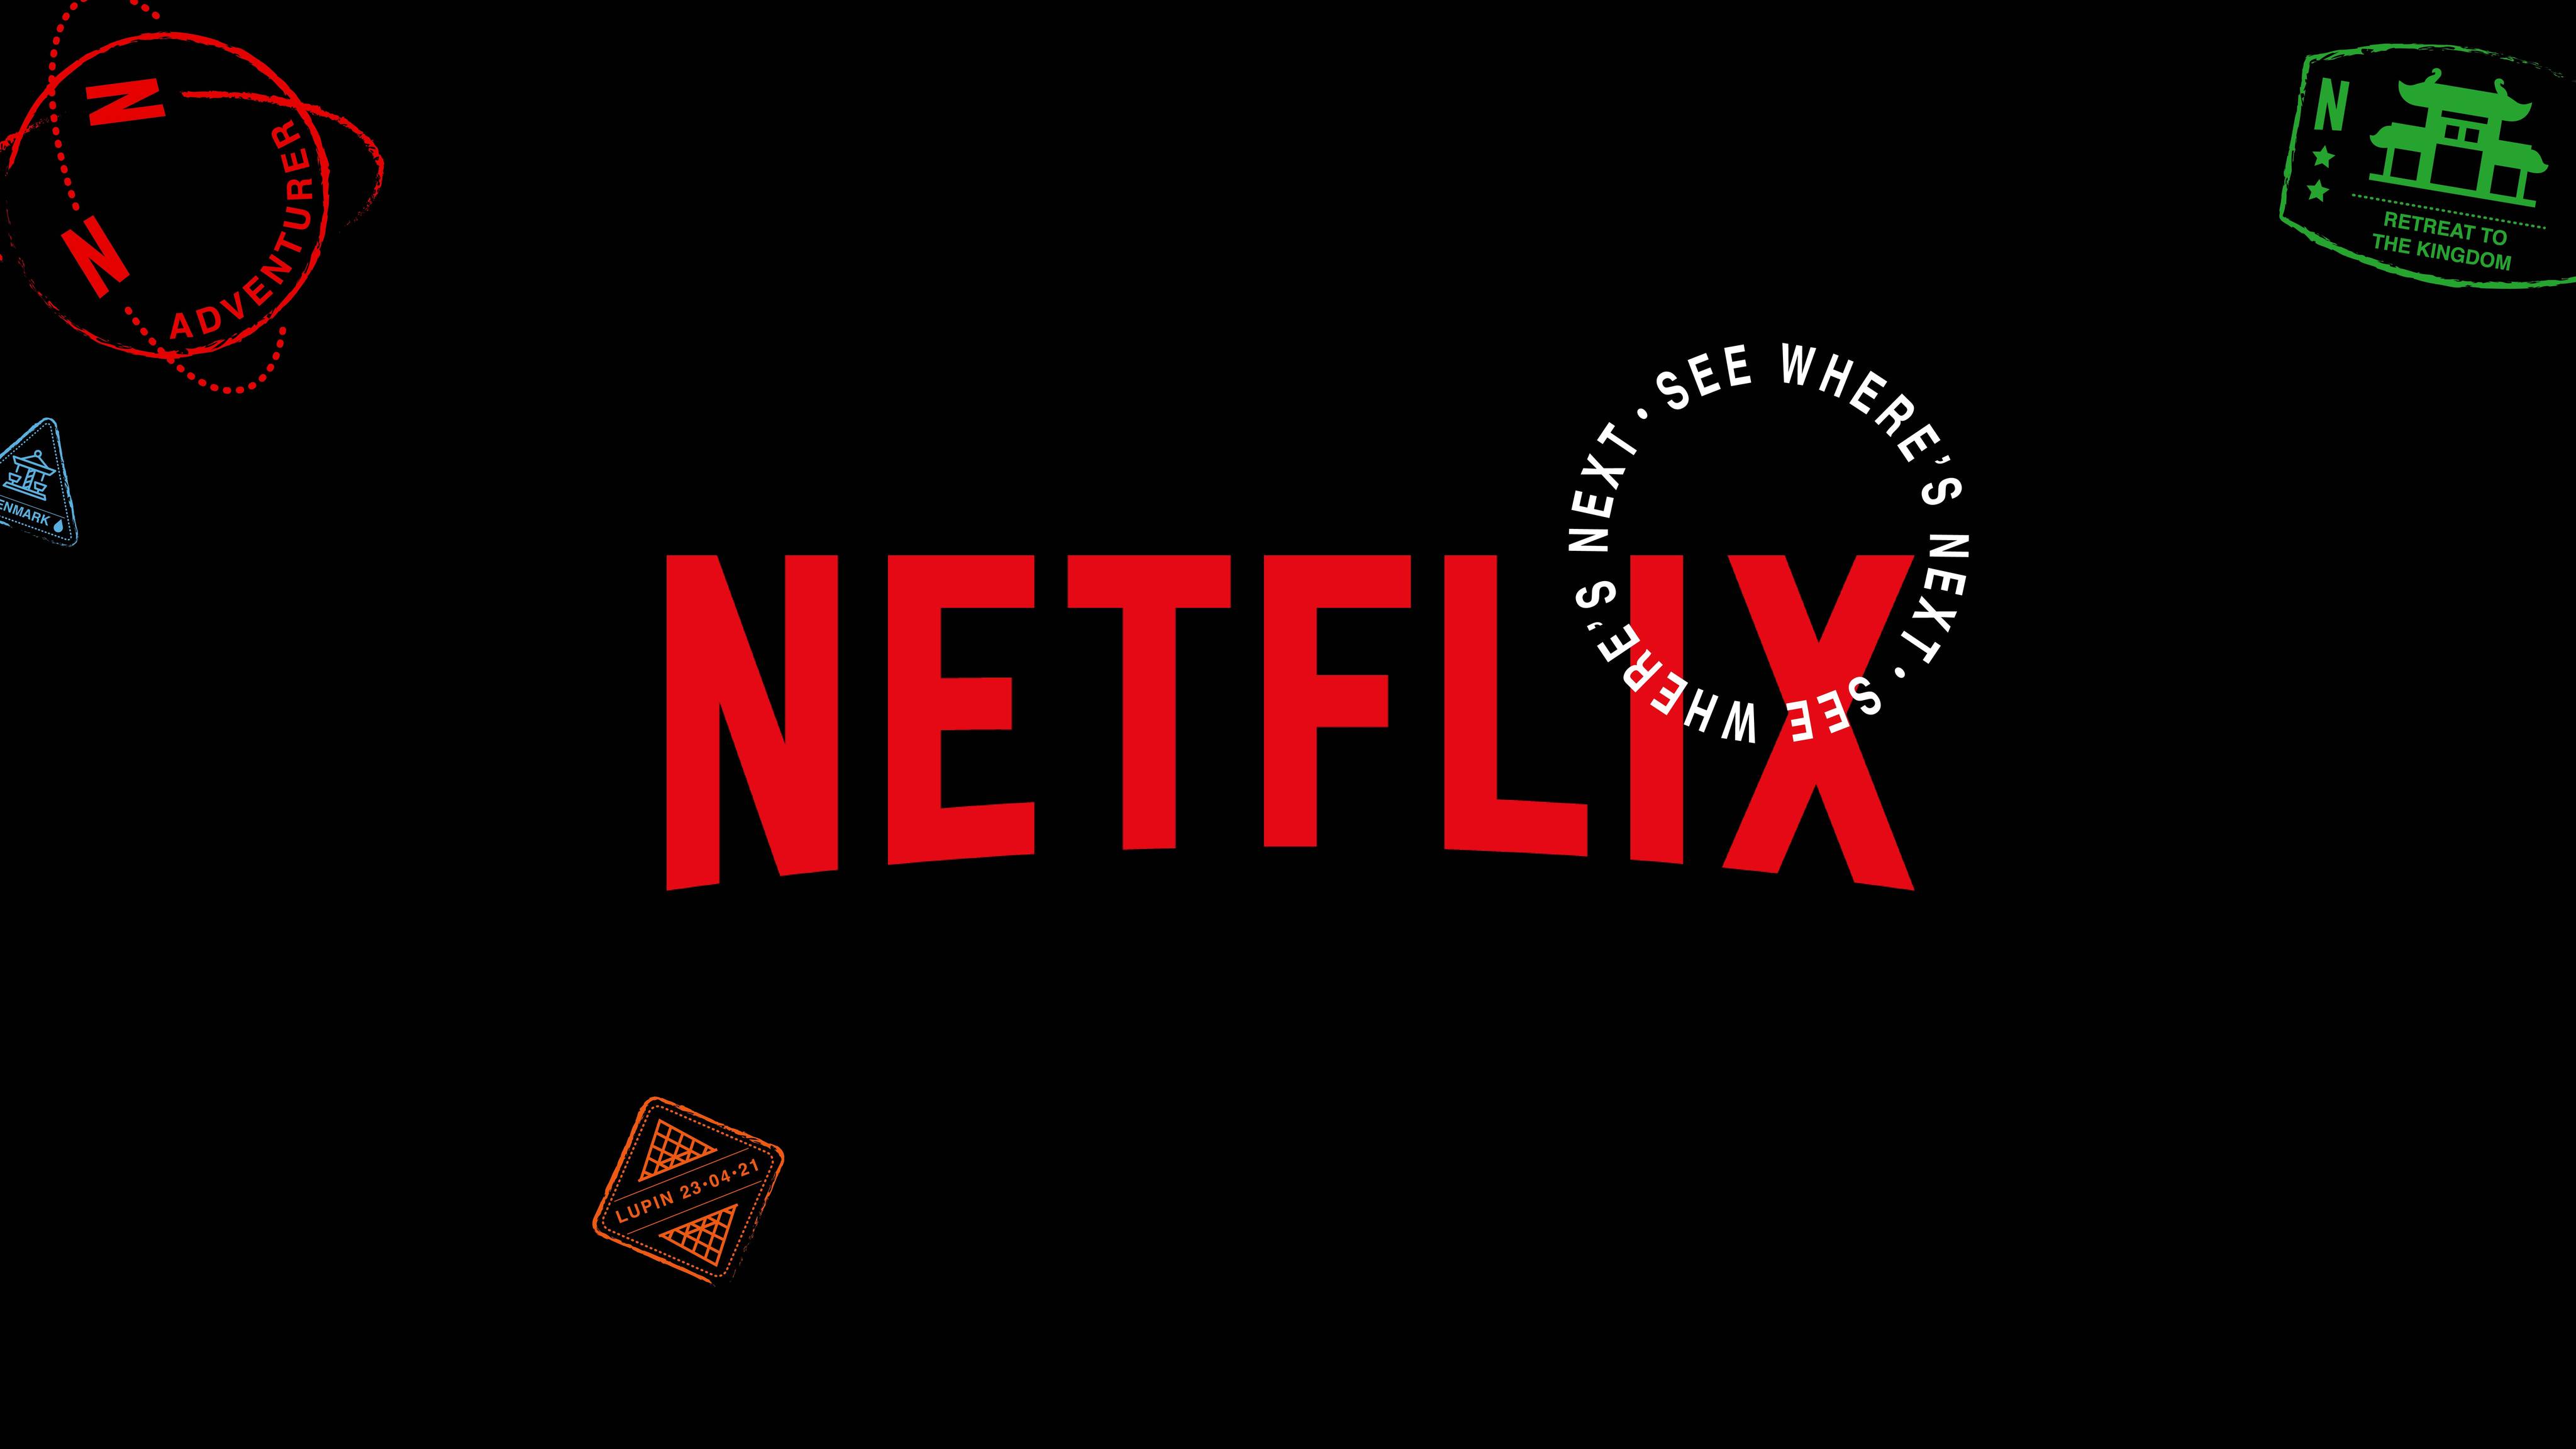 Graphic Communication work by Dominik Sobolewski, Jessie Kaur, Keiran Oshea, Madelene Rourke showing a D&AD Submission for Netflix. The Netflix logo is on a black background with a white text stamp over the 'ix', saying 'see where's next'